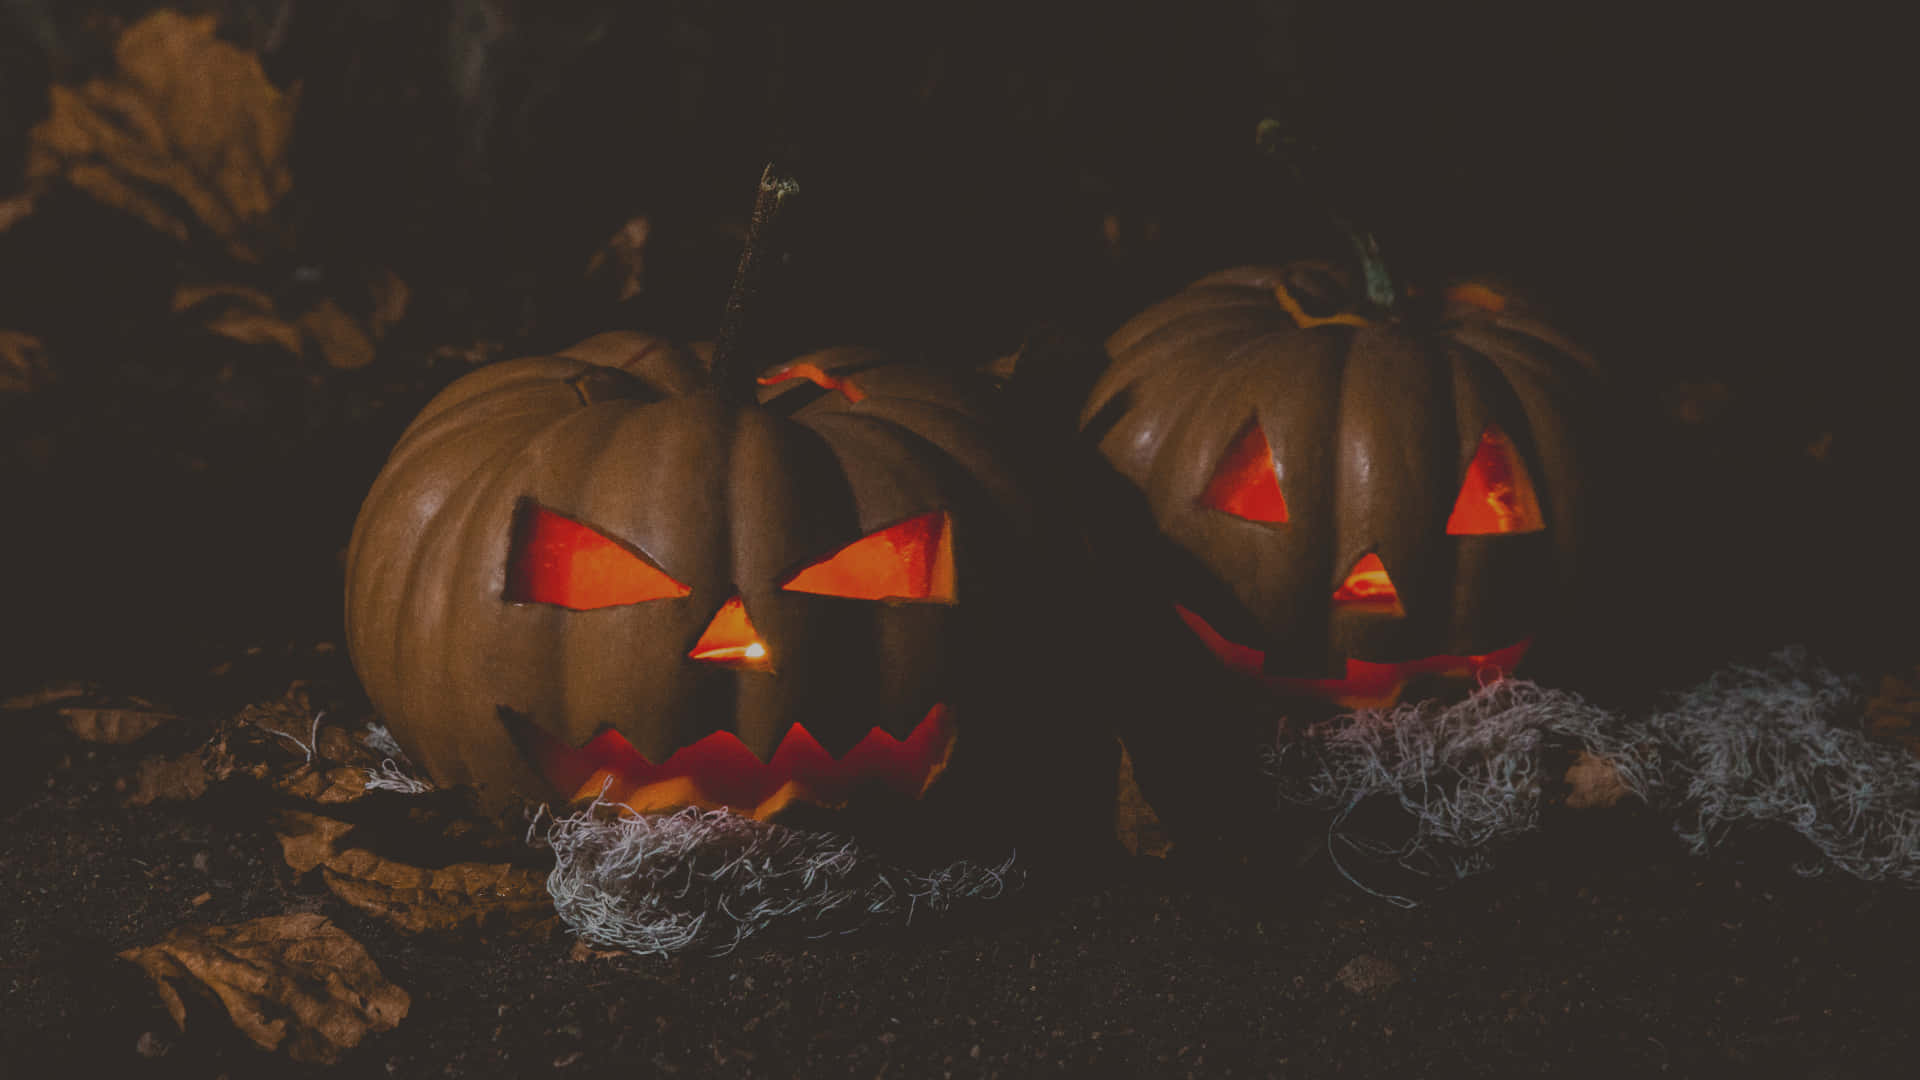 Two Pumpkins With Glowing Eyes In The Dark